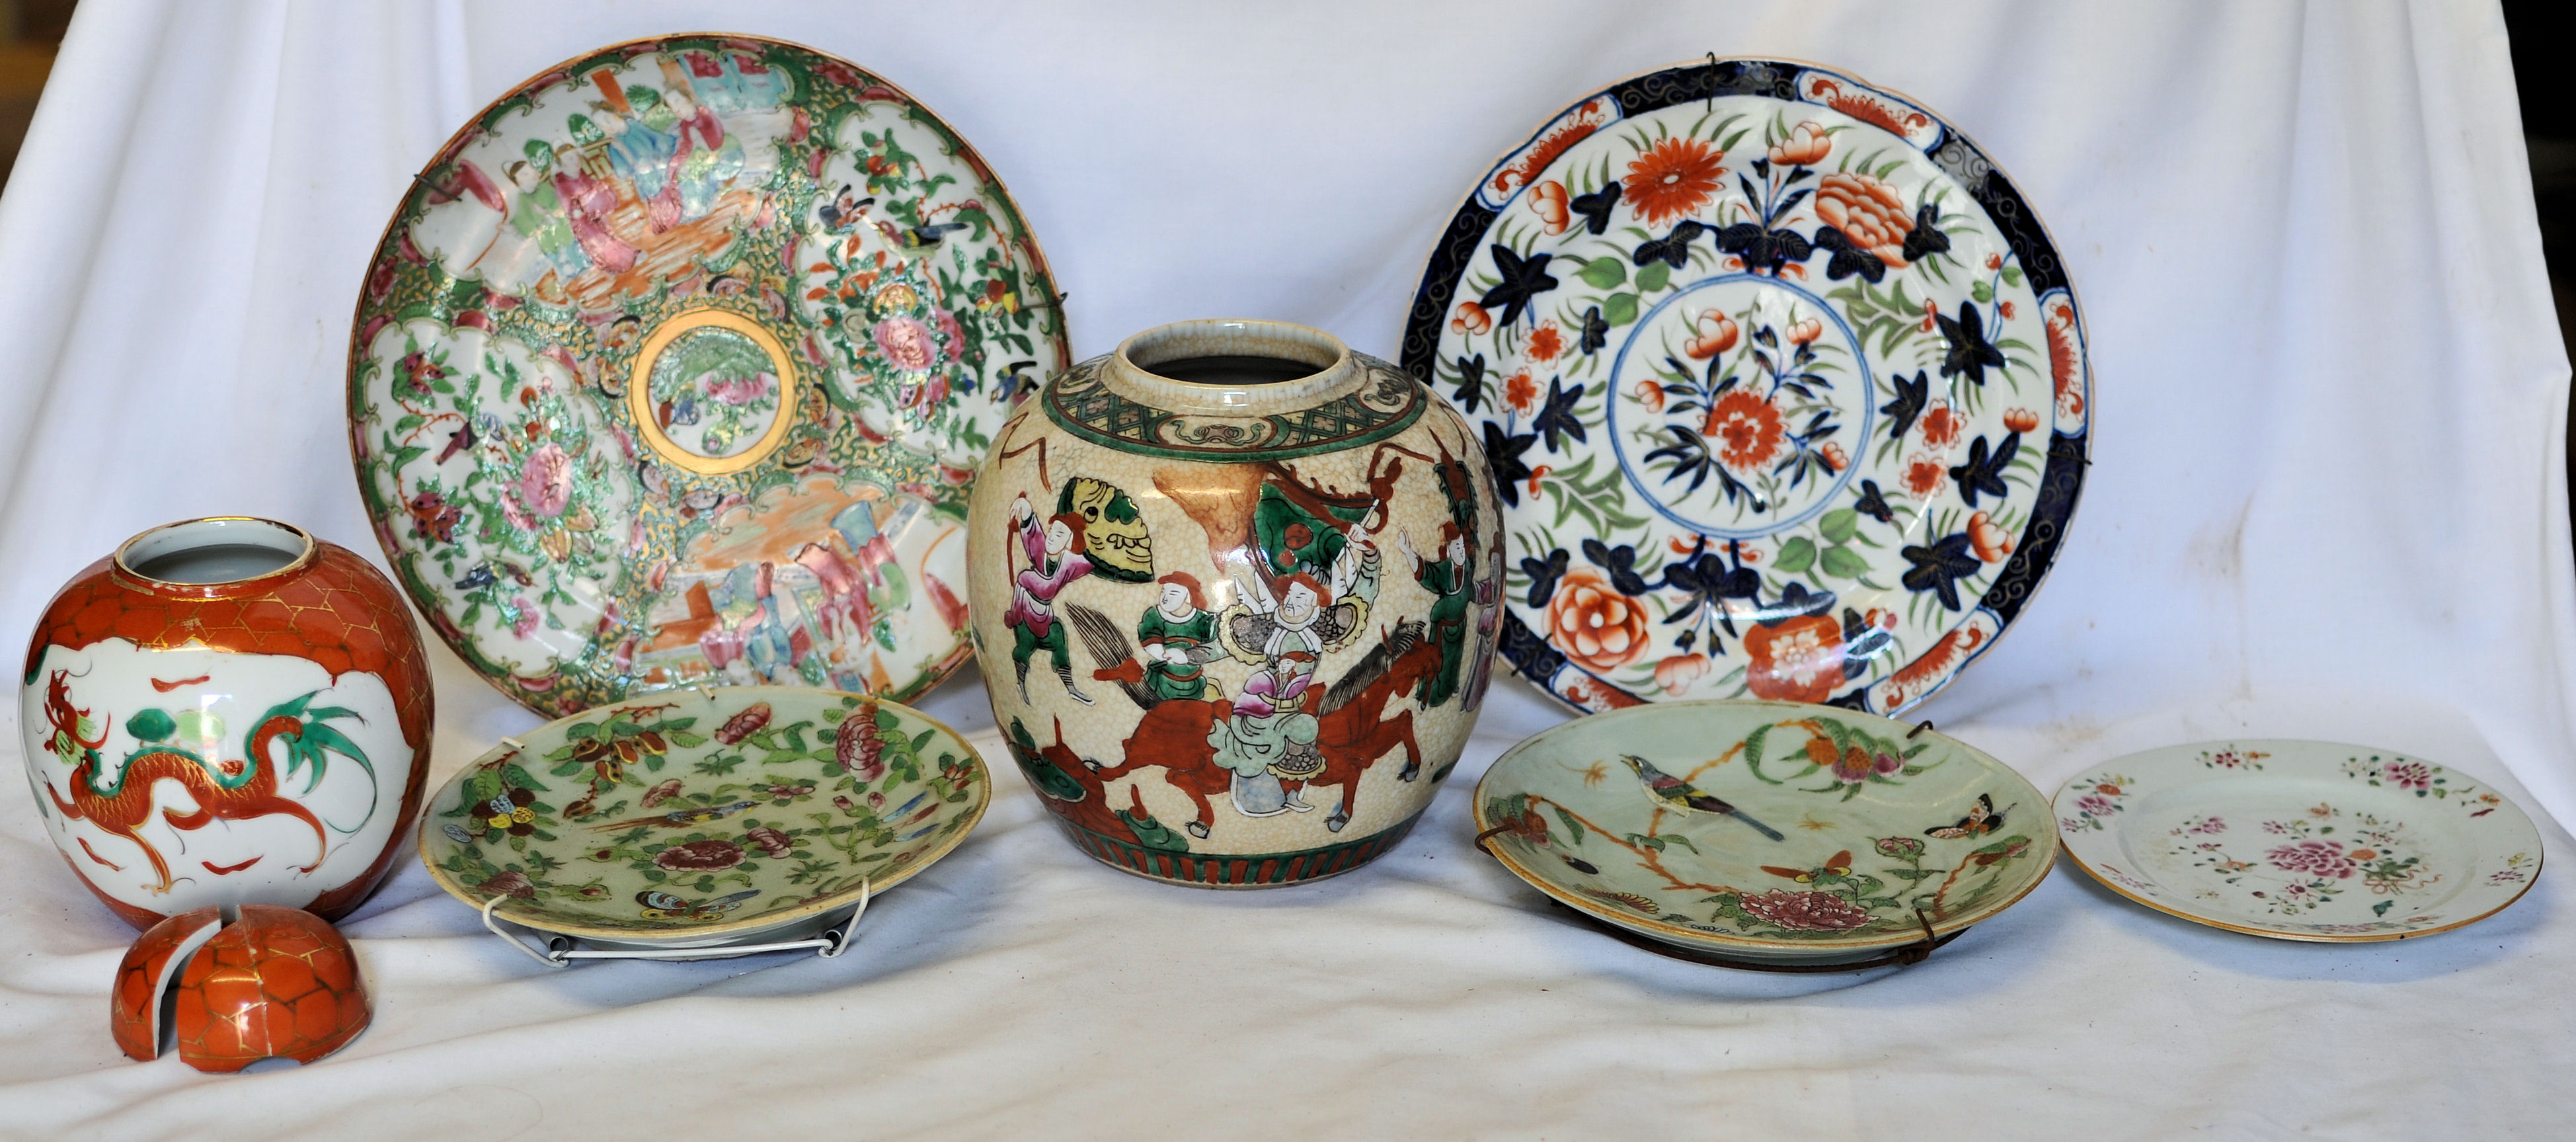 A Cantonese Plate decorated with panels of figures and flowers, 10"" (26cms) diameter, an Imari